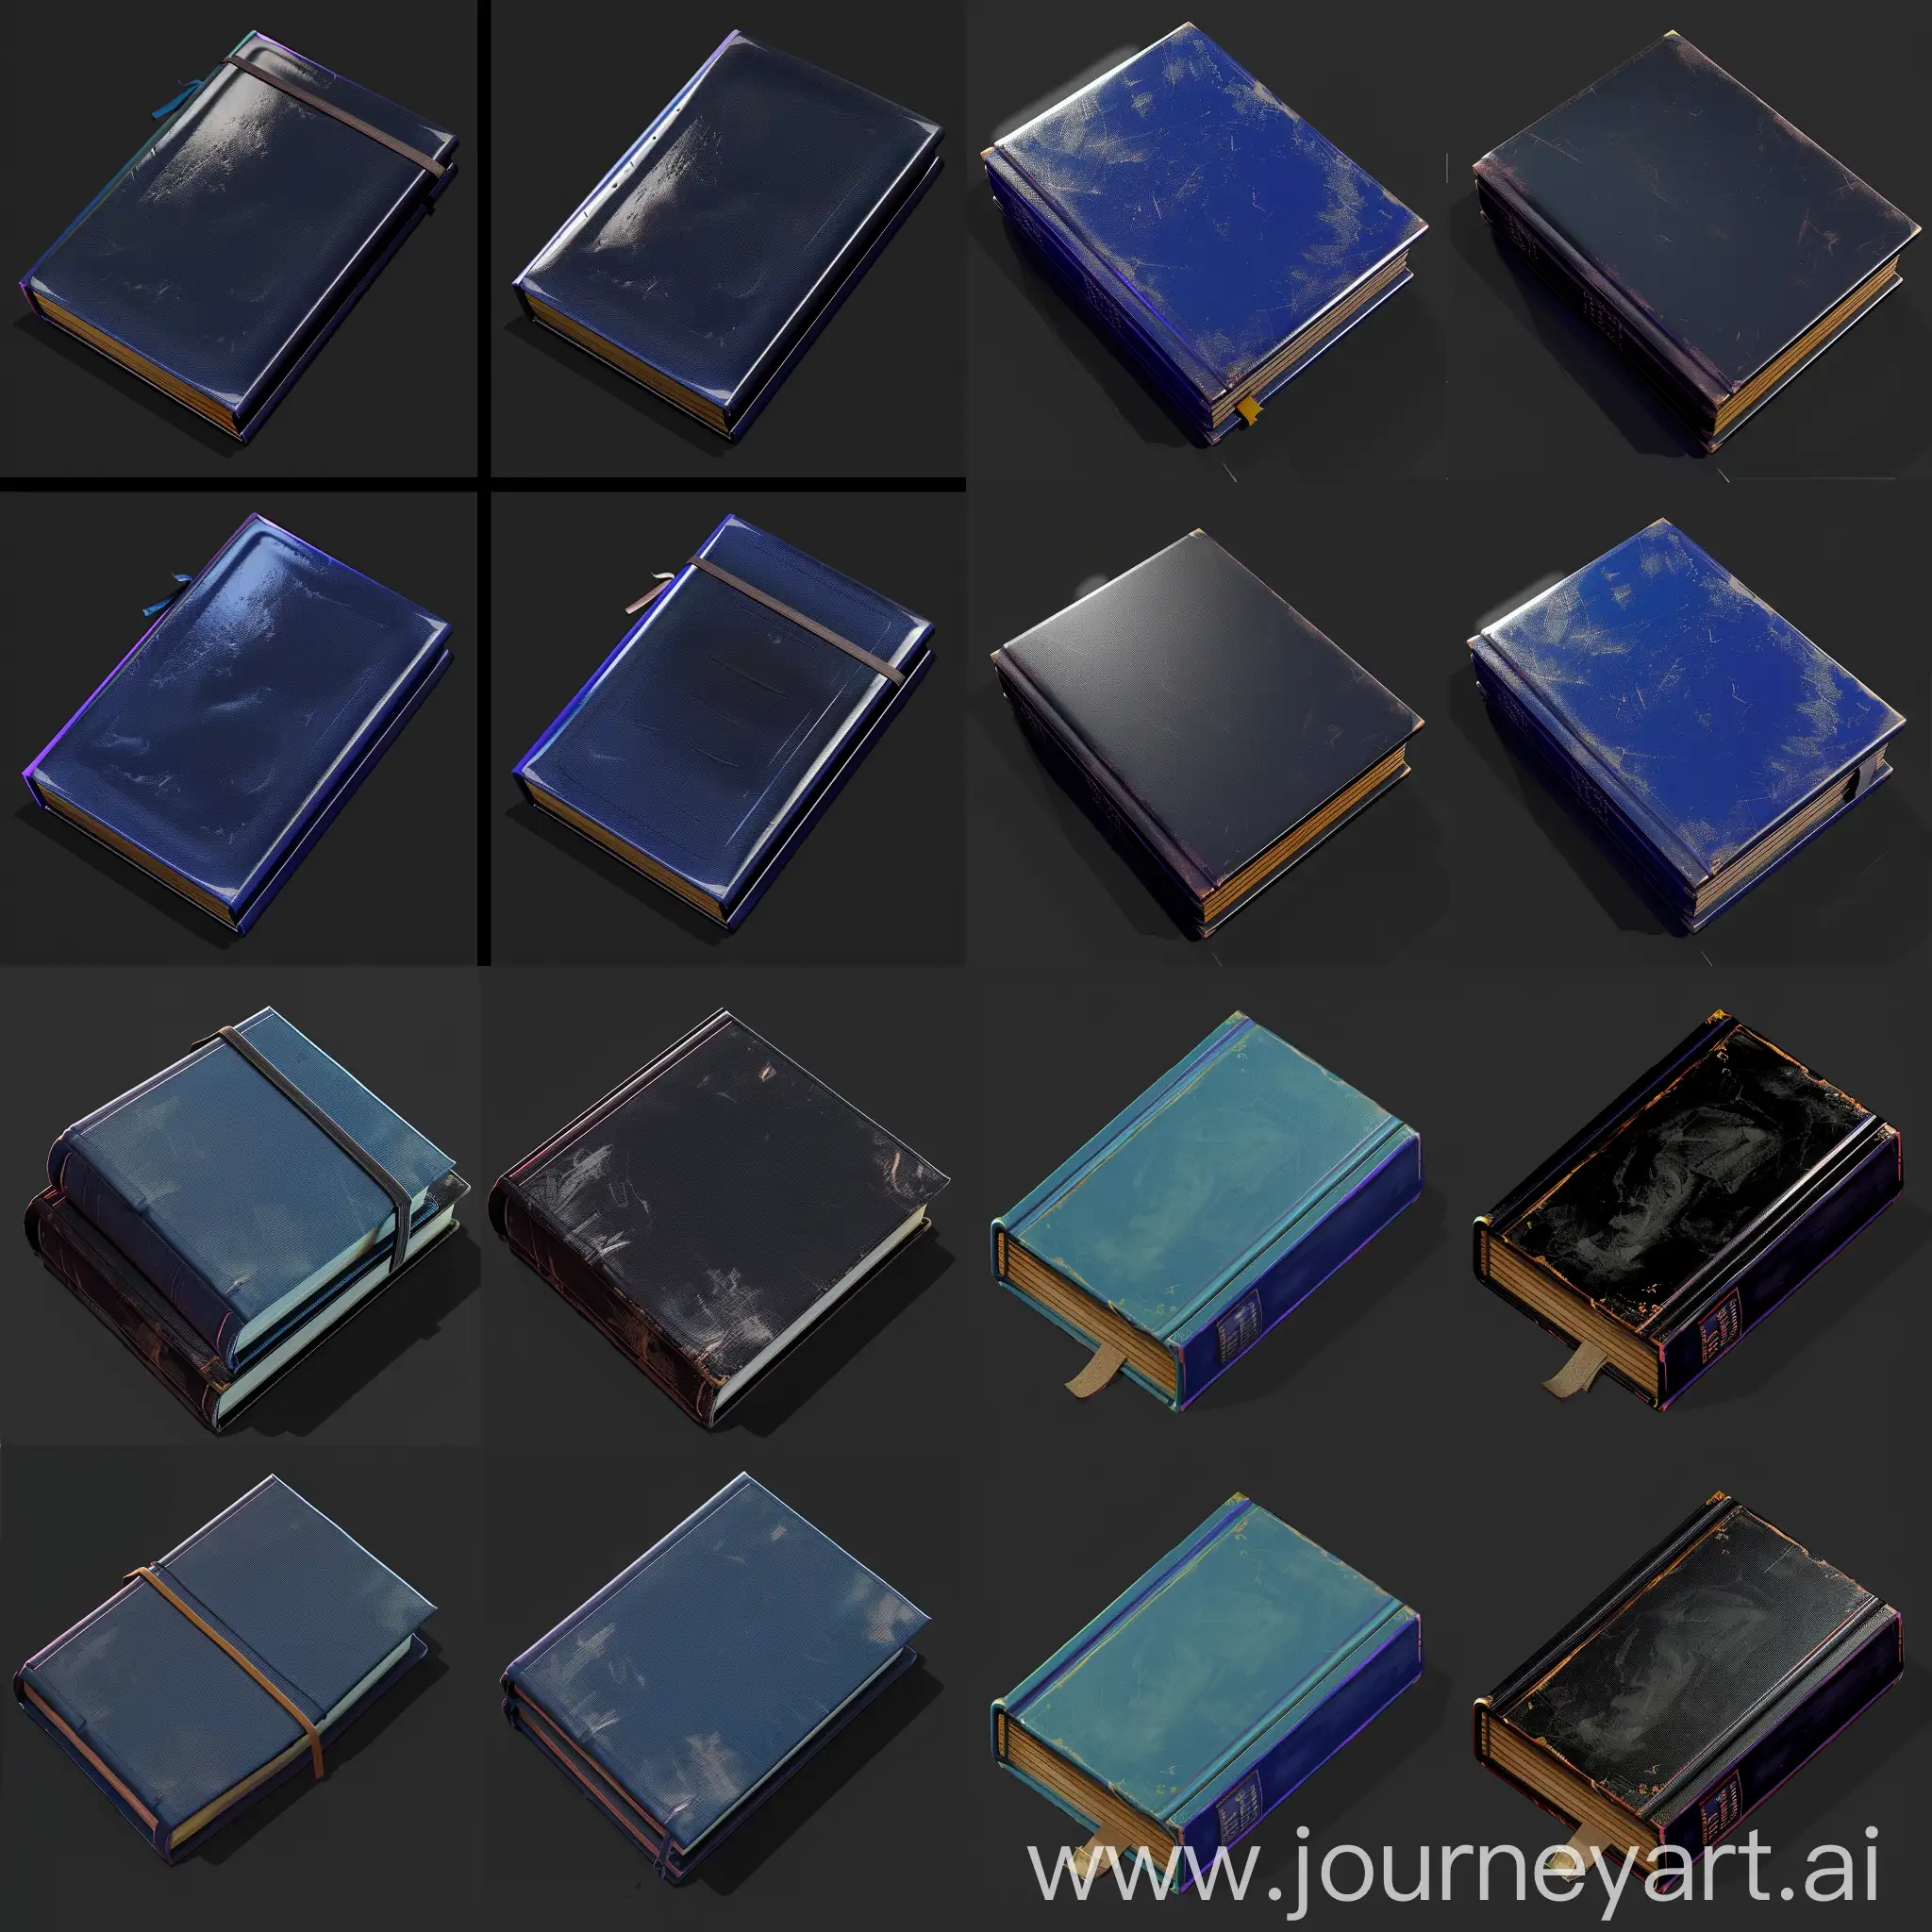 Isometric-Blue-Textbooks-on-Black-Background-Realistic-3D-Render